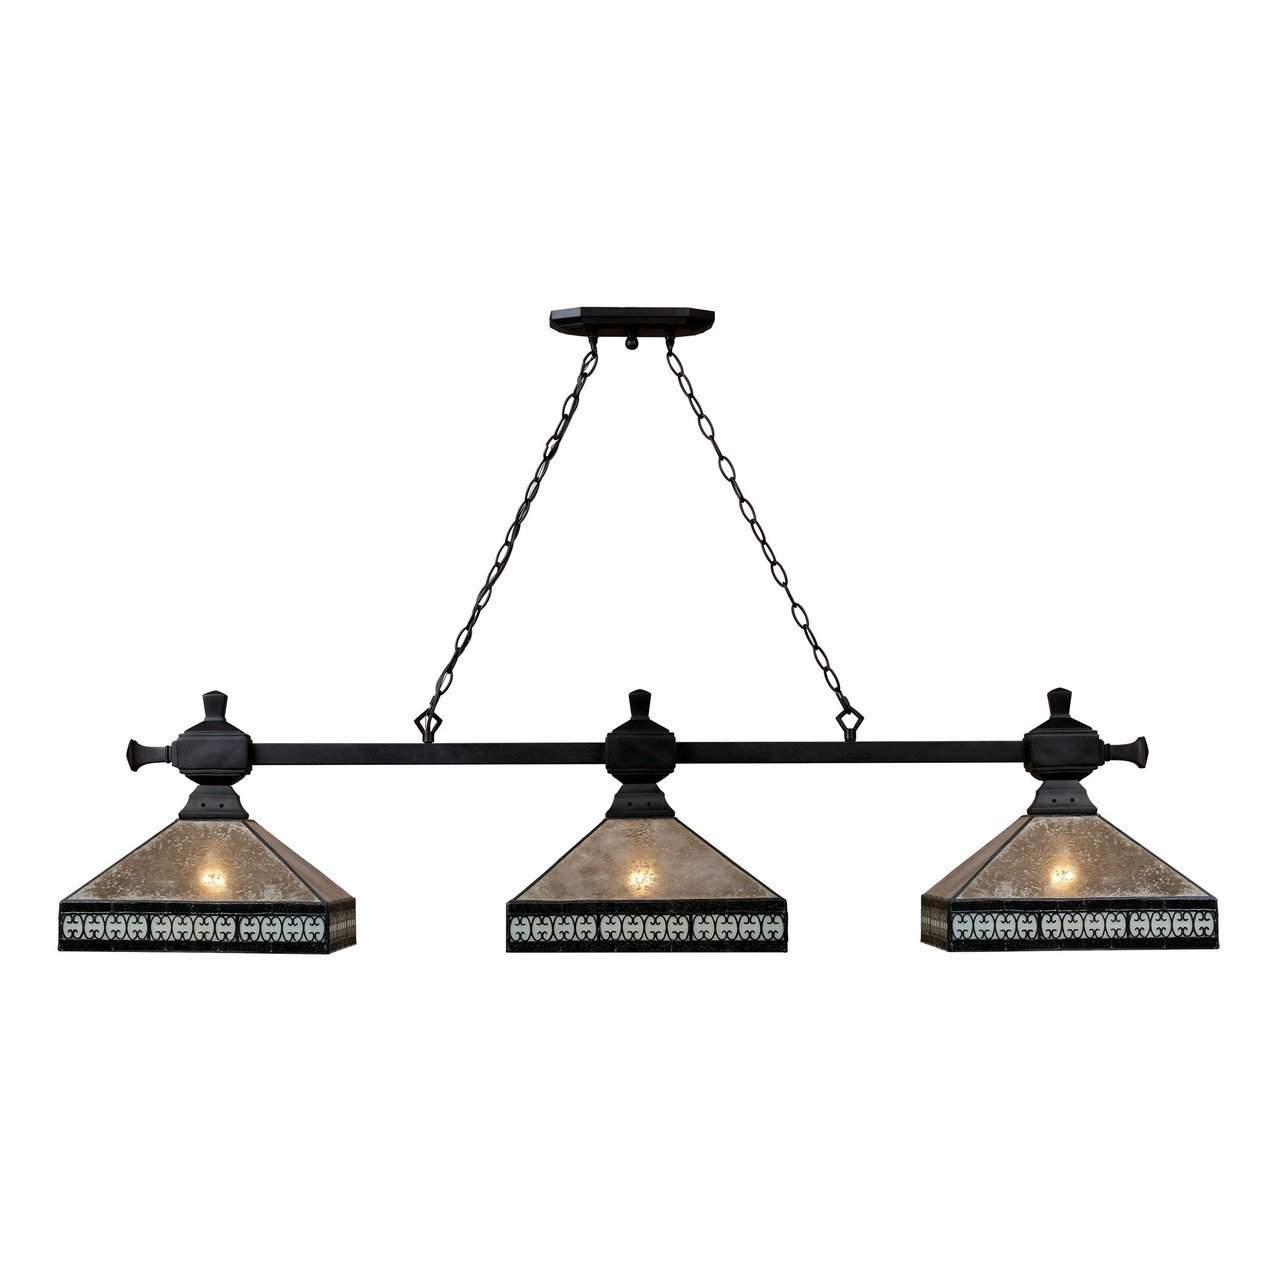 Elk Lighting, Inc. New Product  Mica Filagree 3 Light Billiard In Tiffany Bronze And Tan Mica 70061-3 Sold by VaasuHomes